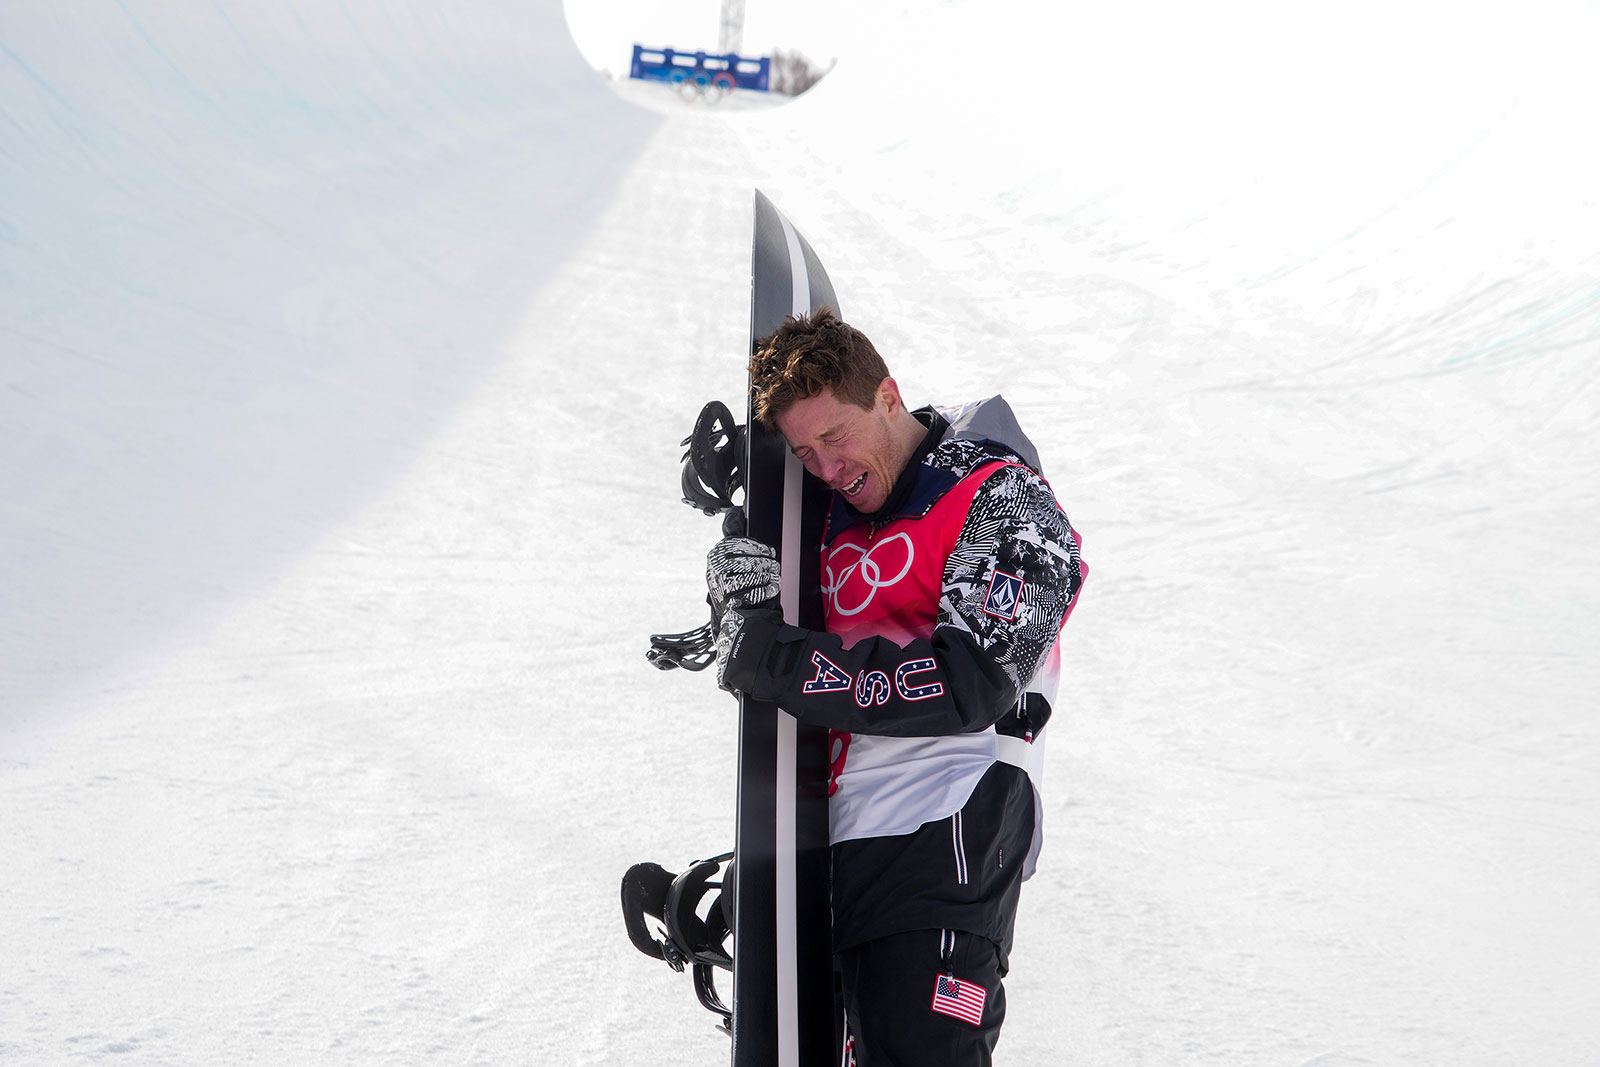 US snowboarding legend Shaun White becomes emotional after his final Olympic run in the halfpipe final on February 11. White, the Olympic champion in 2006, 2010 and 2018, finished fourth this time around.